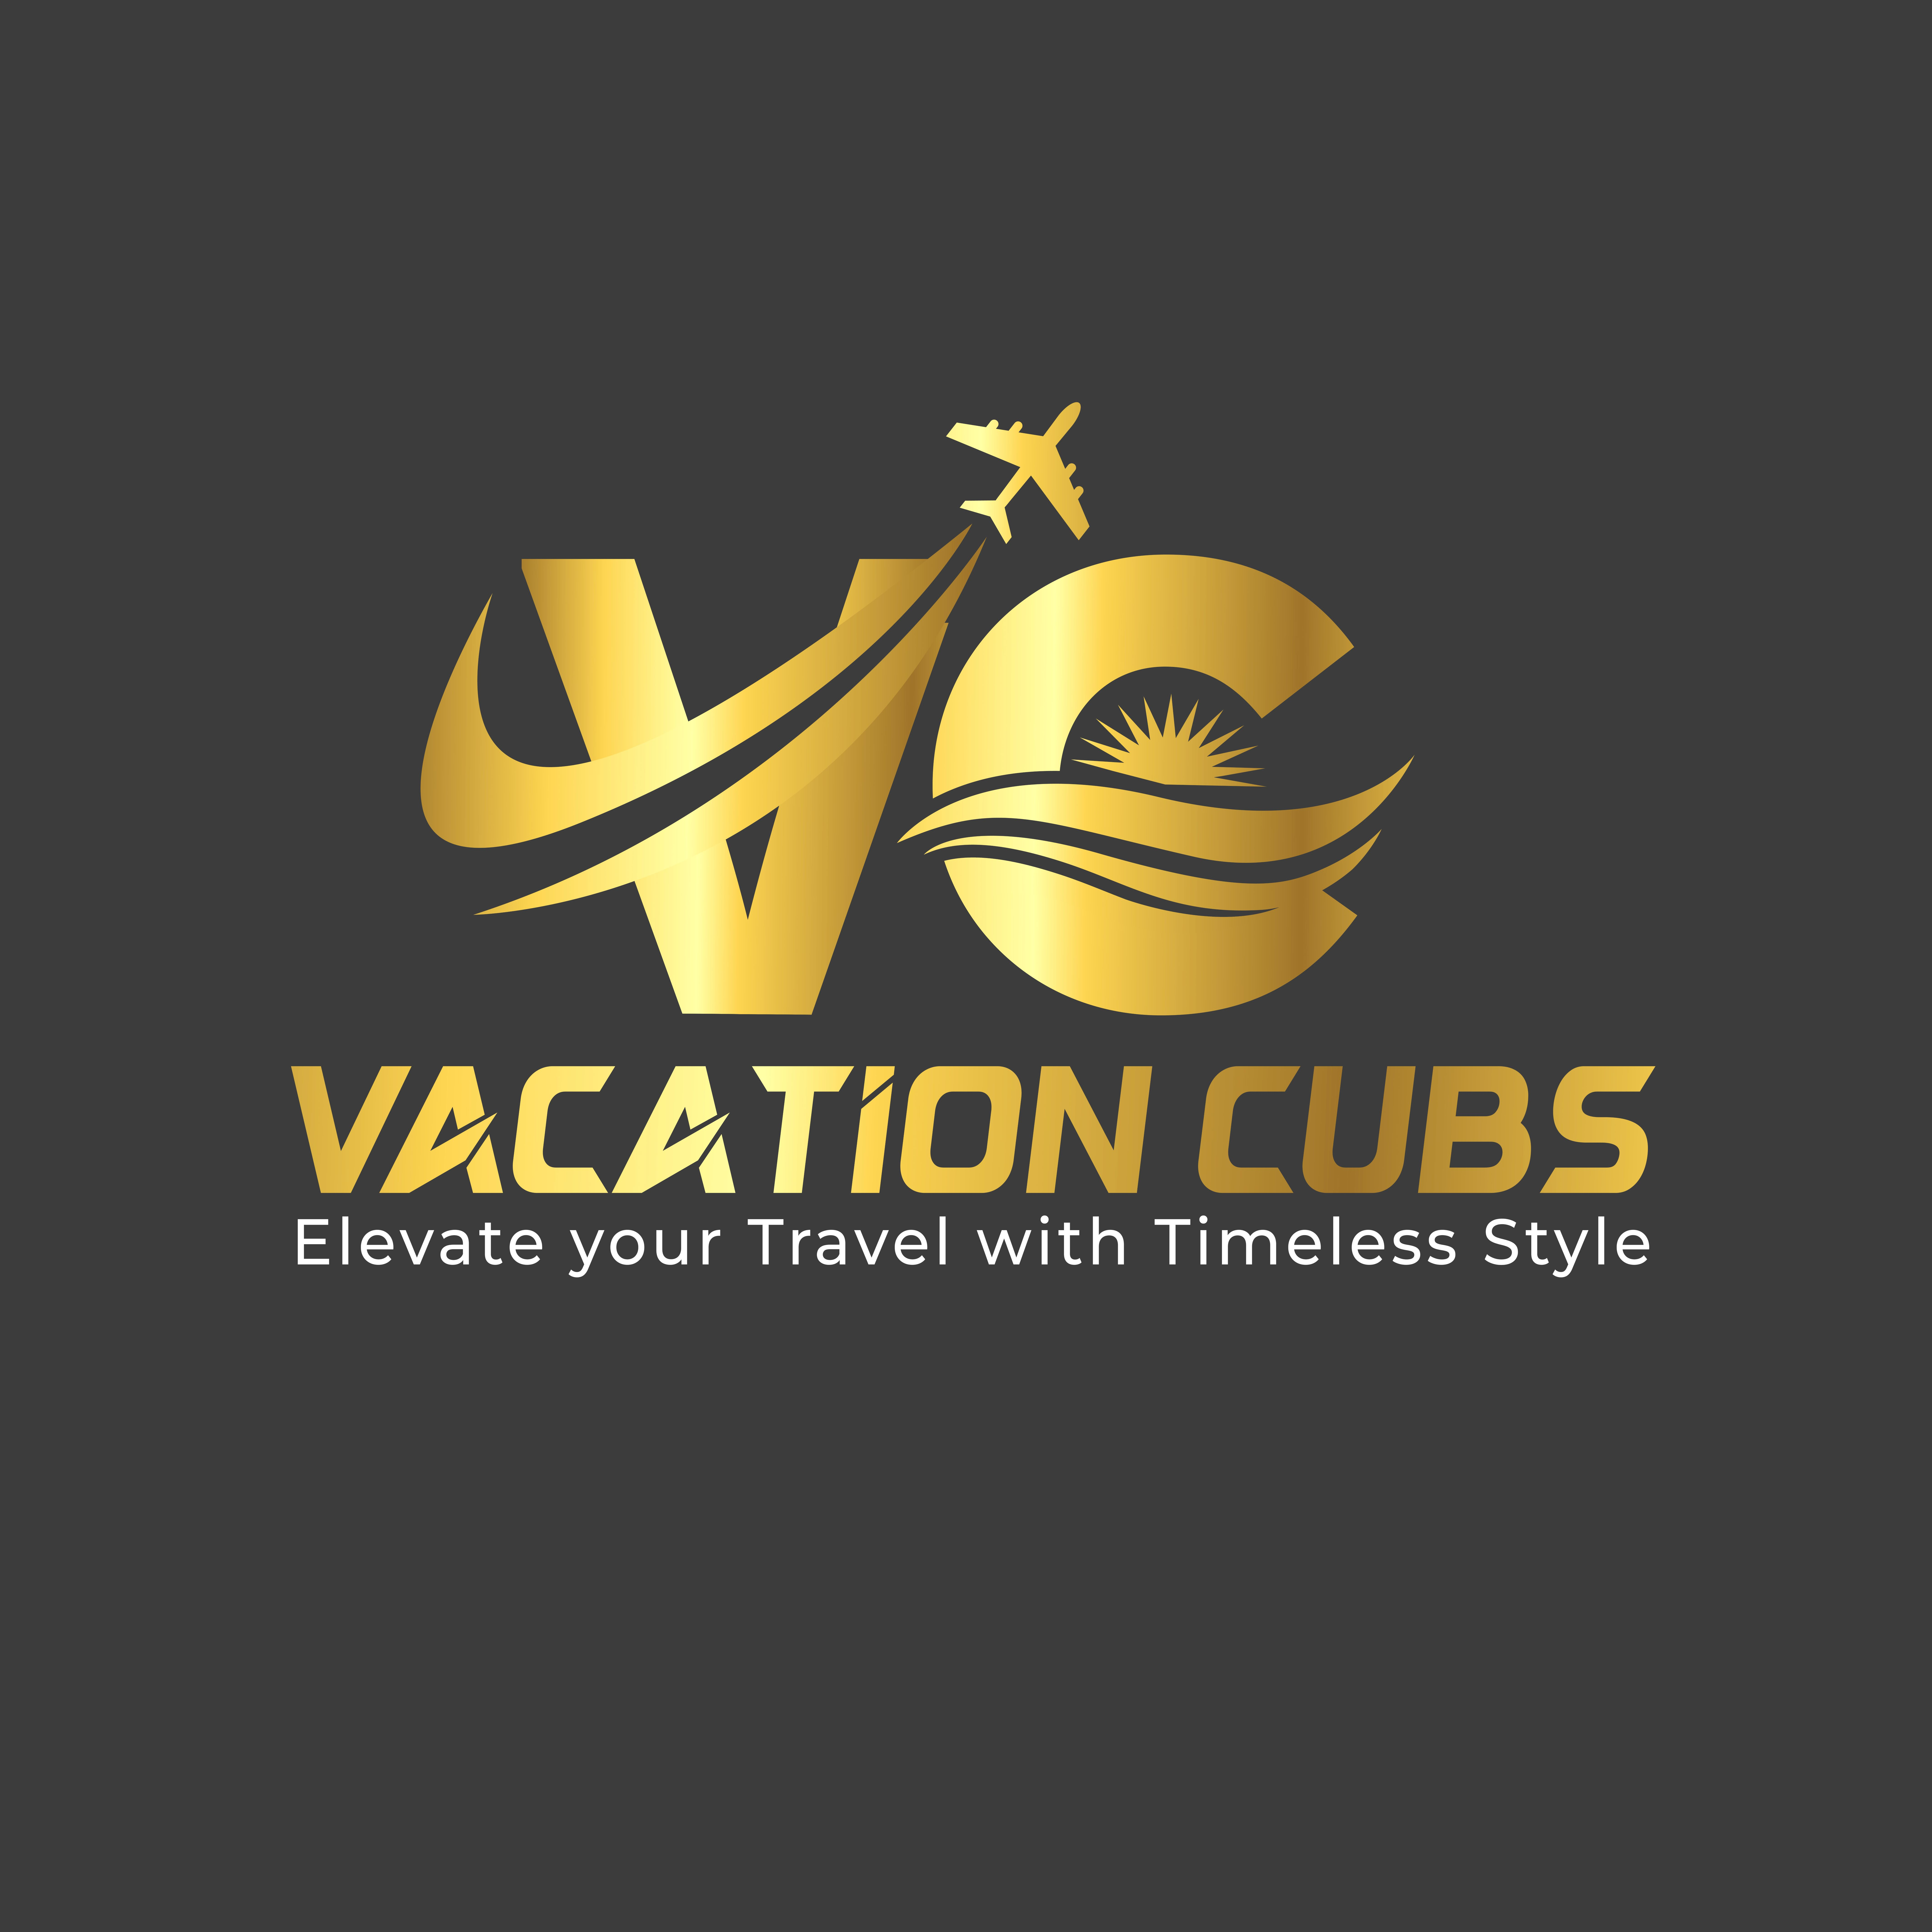 Vacation Cubs